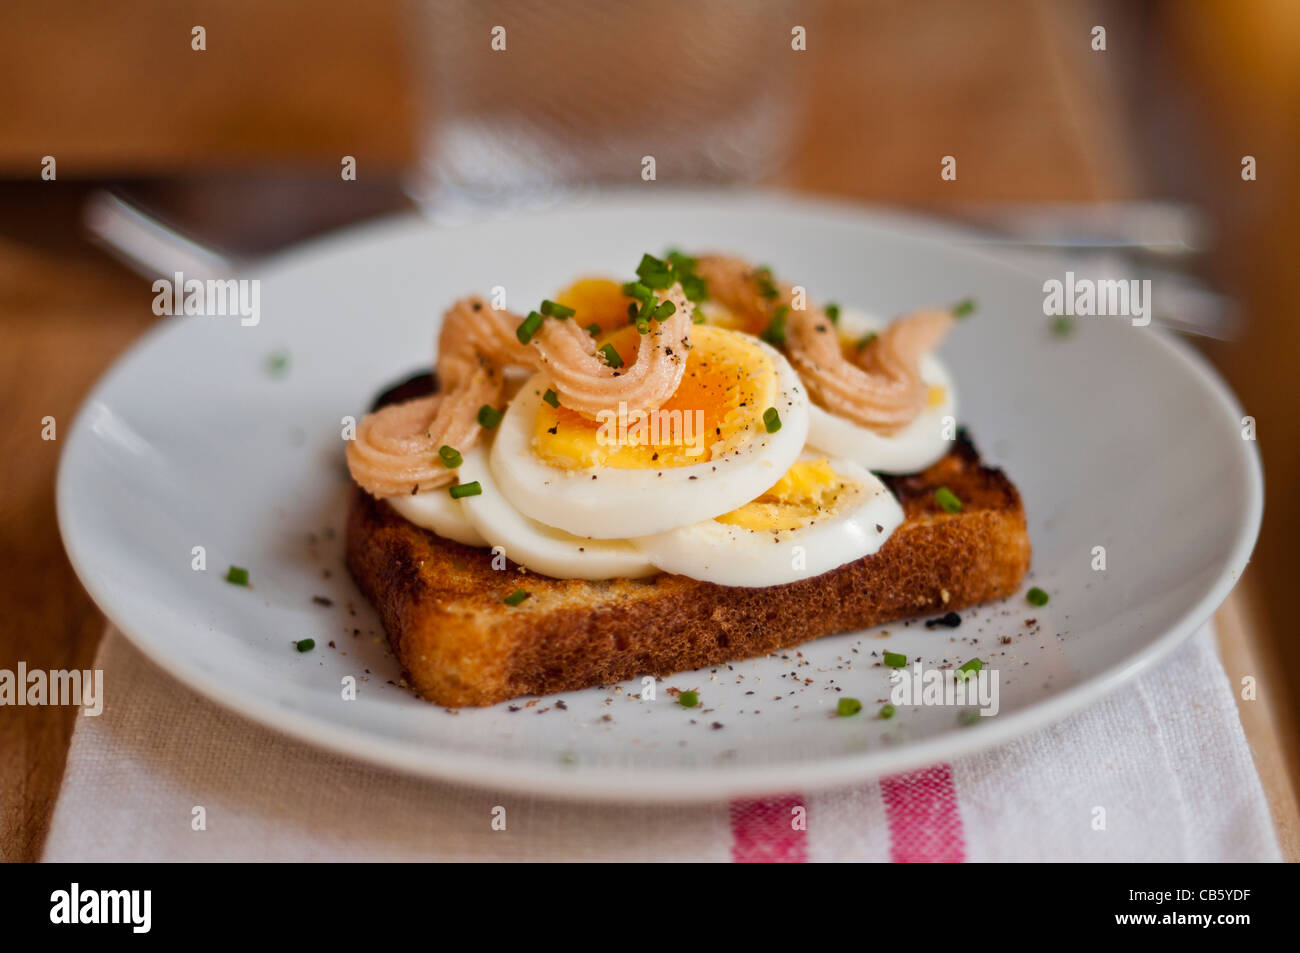 Classic Swedish open faced sandwich of sliced boiled egg topped with Kalle's kaviar and sprinkled with chopped chives. Stock Photo